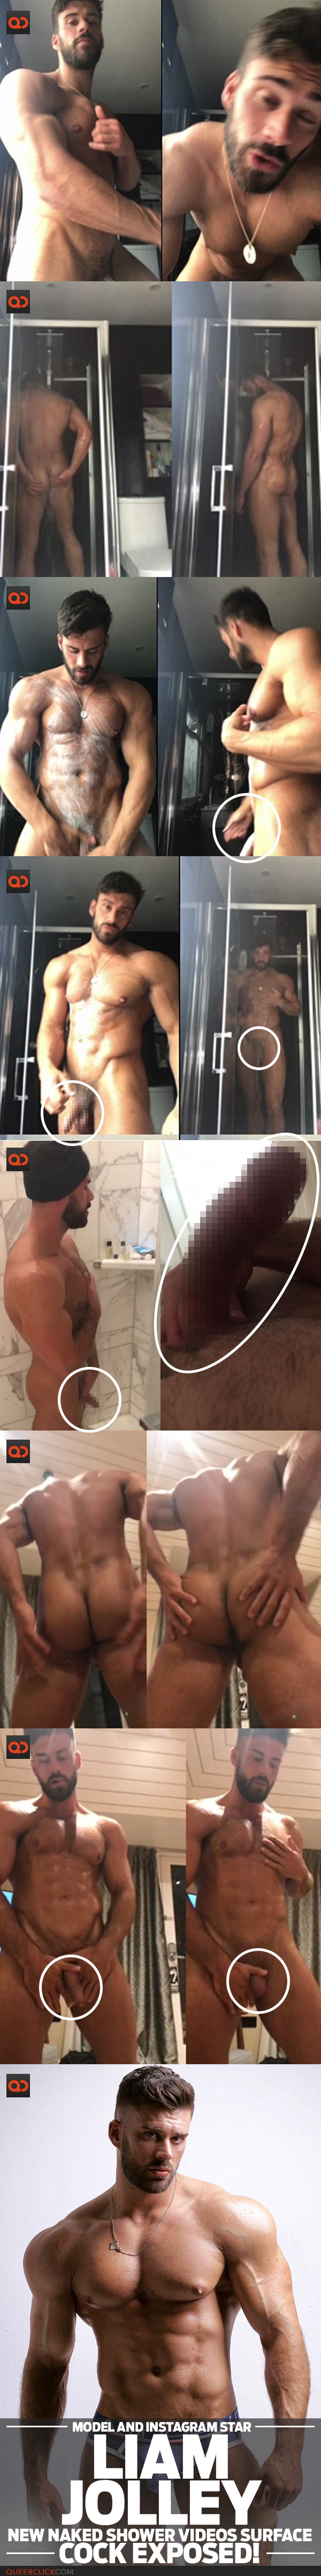 Liam Jolley Model And Instagram Star New Naked Shower Videos Surface Cock Exposed Queerclick